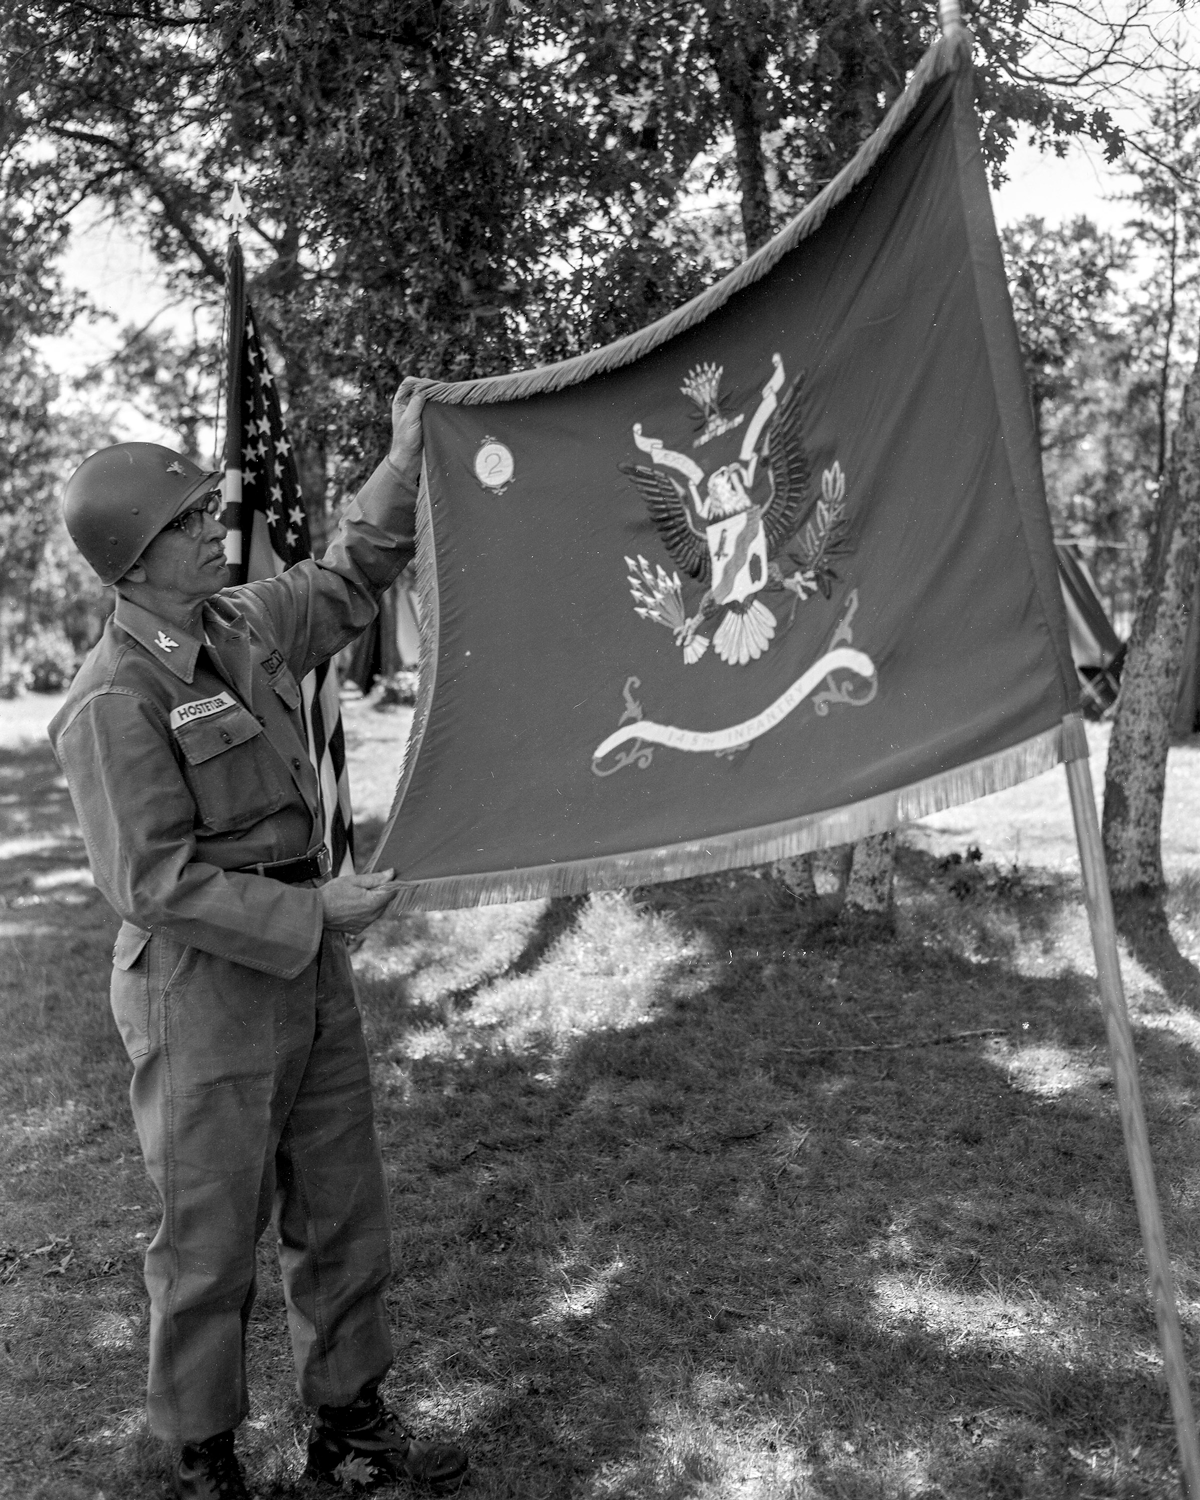 Colonel displaying flag in forest.